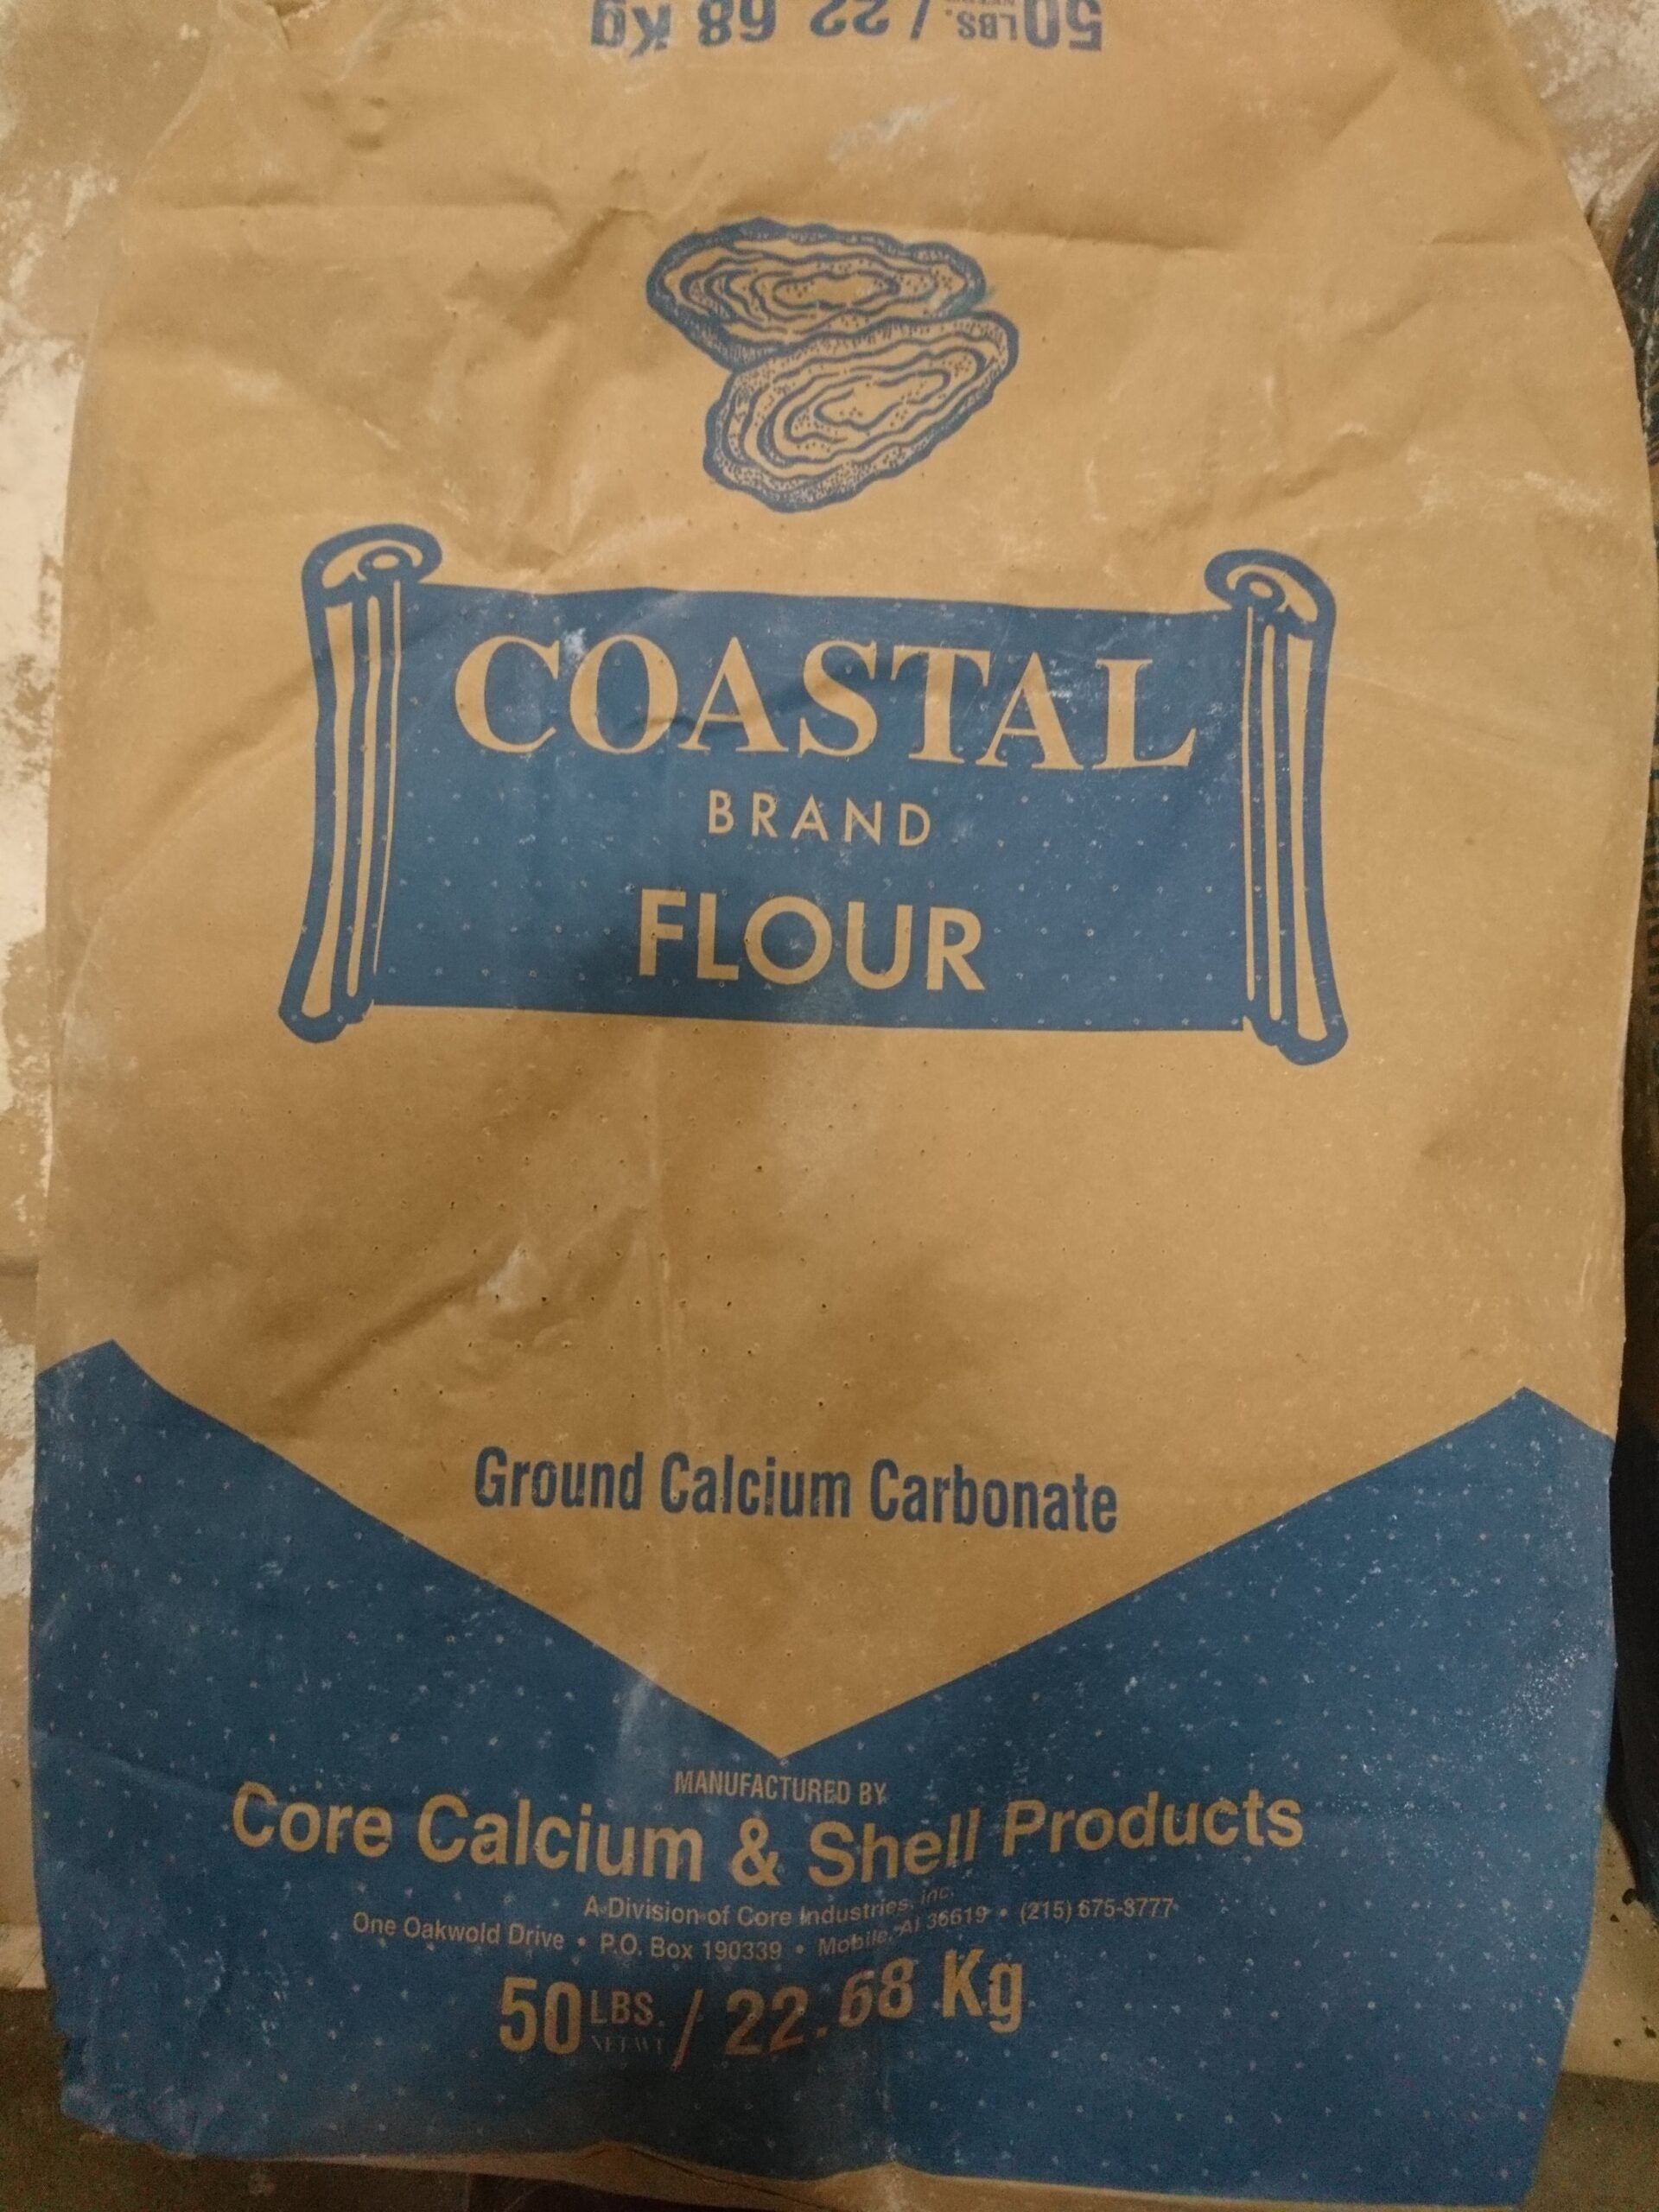 A large brown bag with blue labels and a drawing of an open oyster shell.